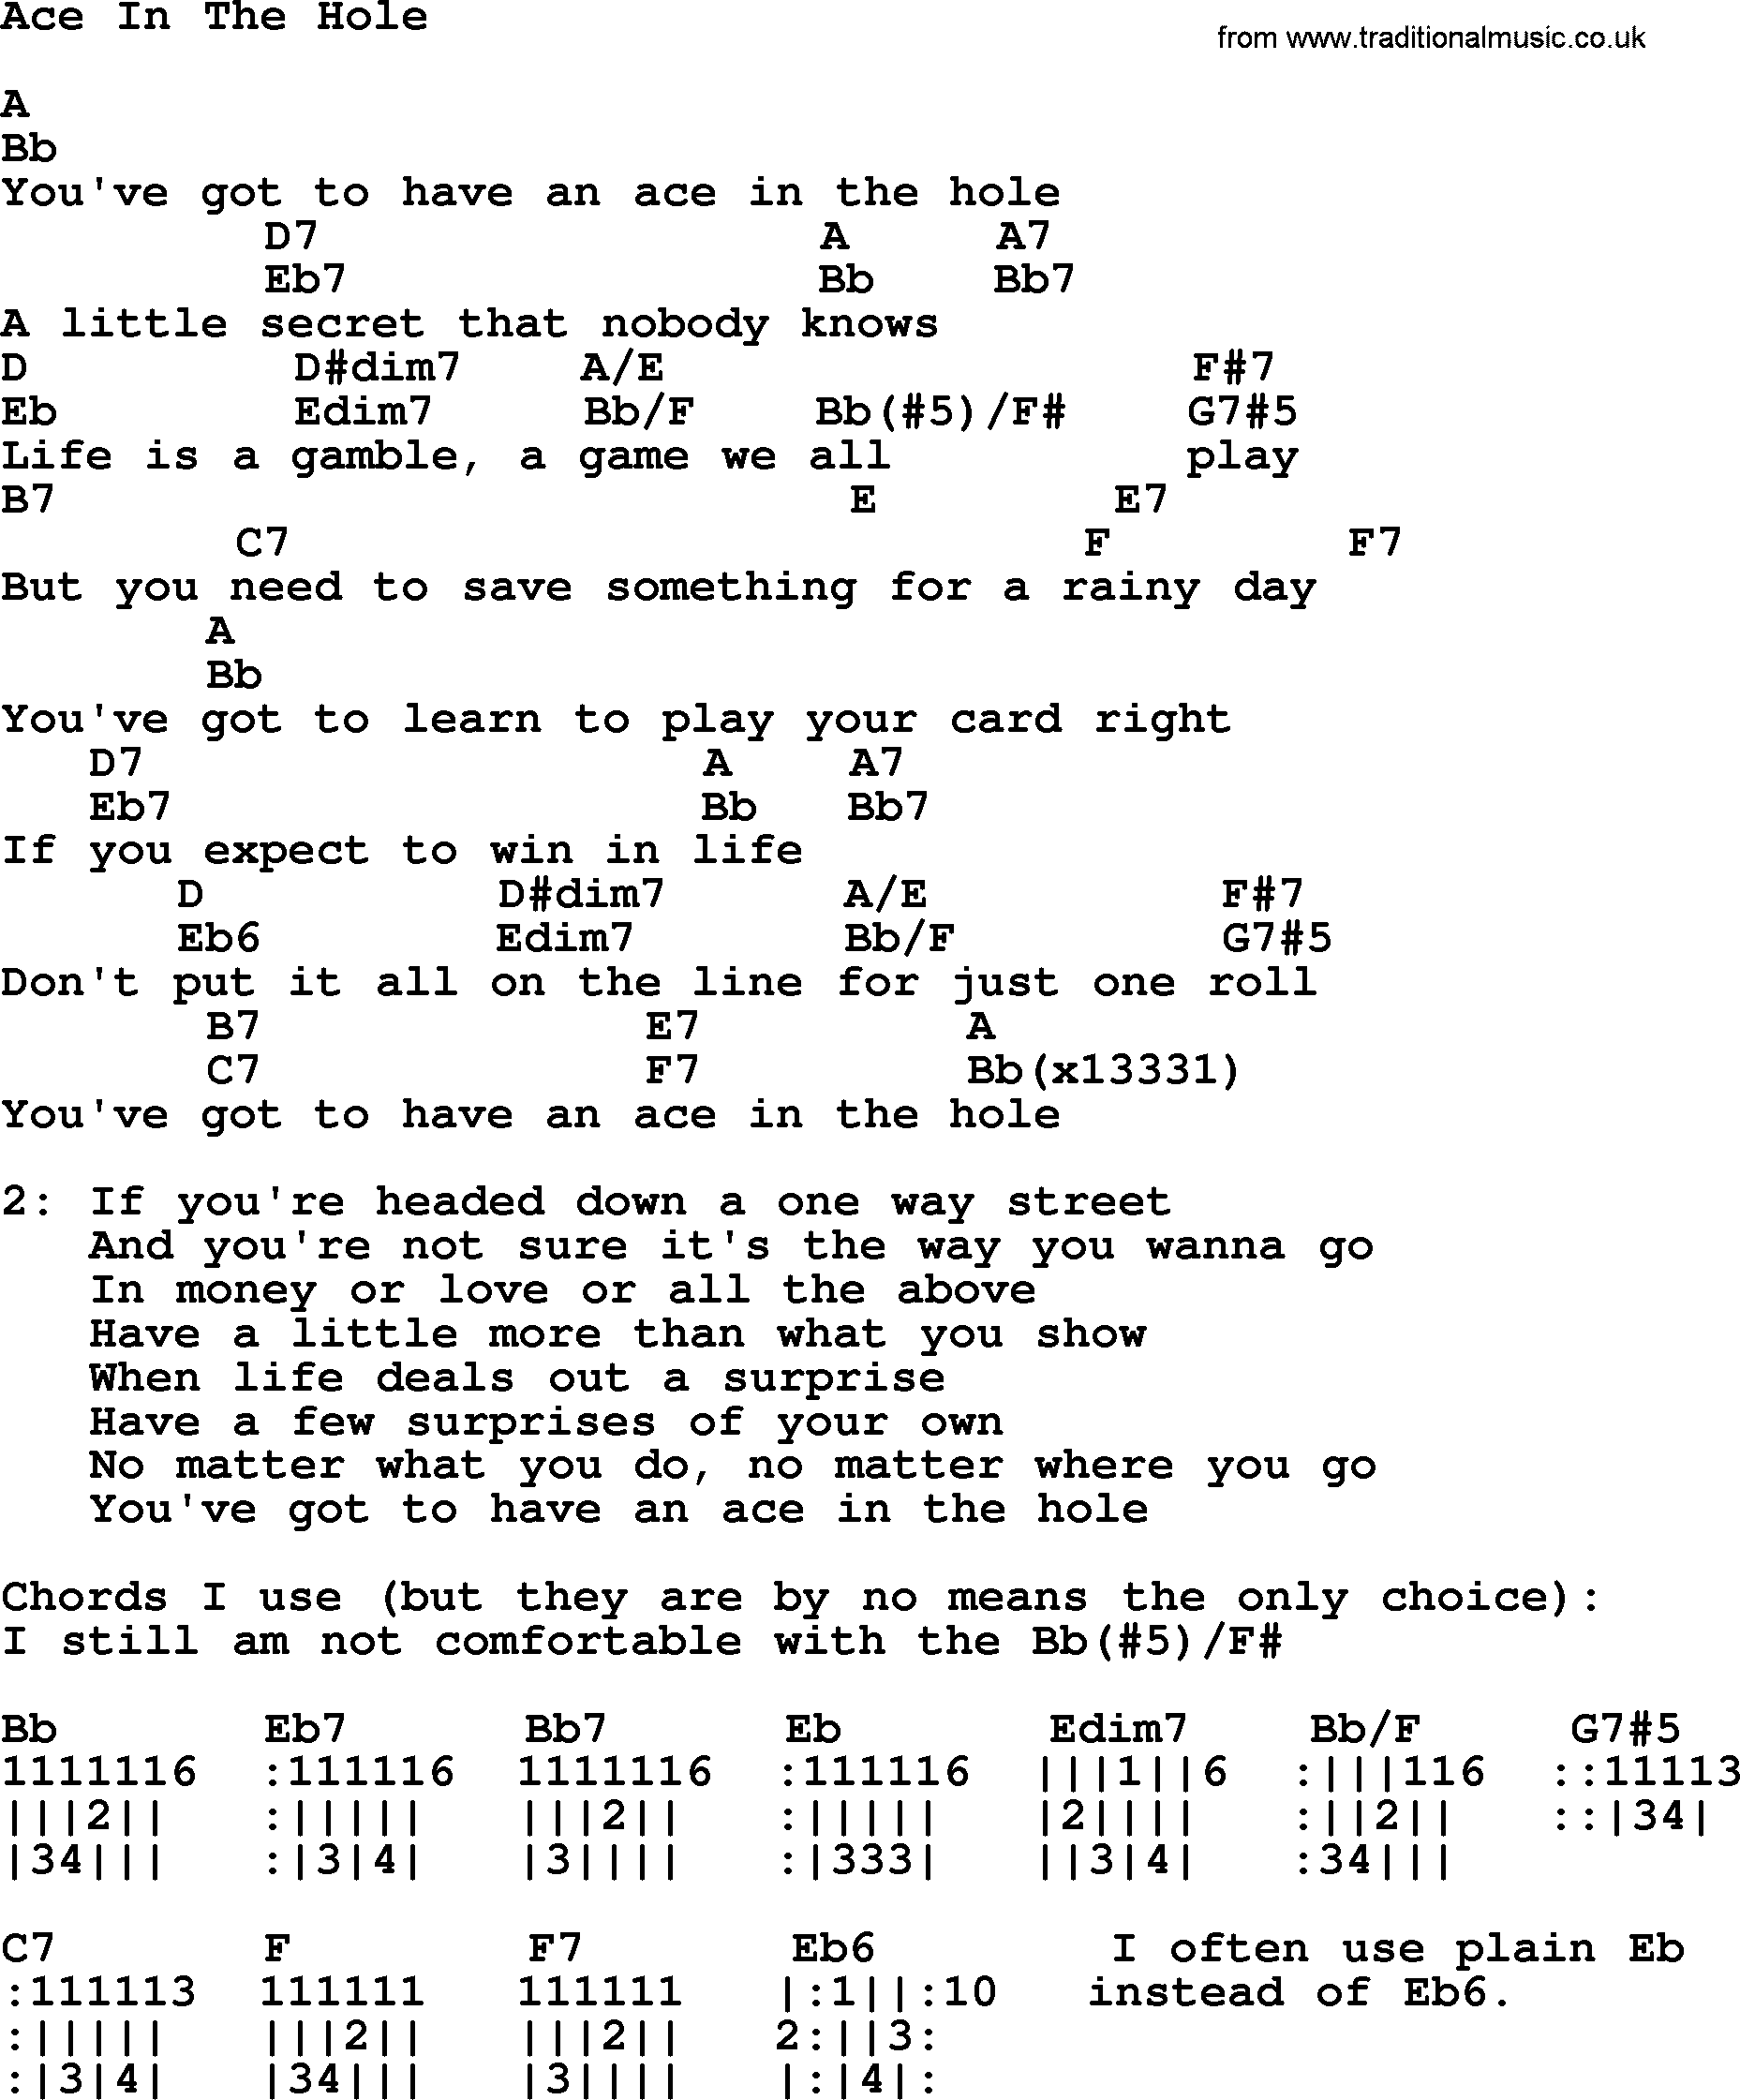 George Strait song: Ace In The Hole, lyrics and chords